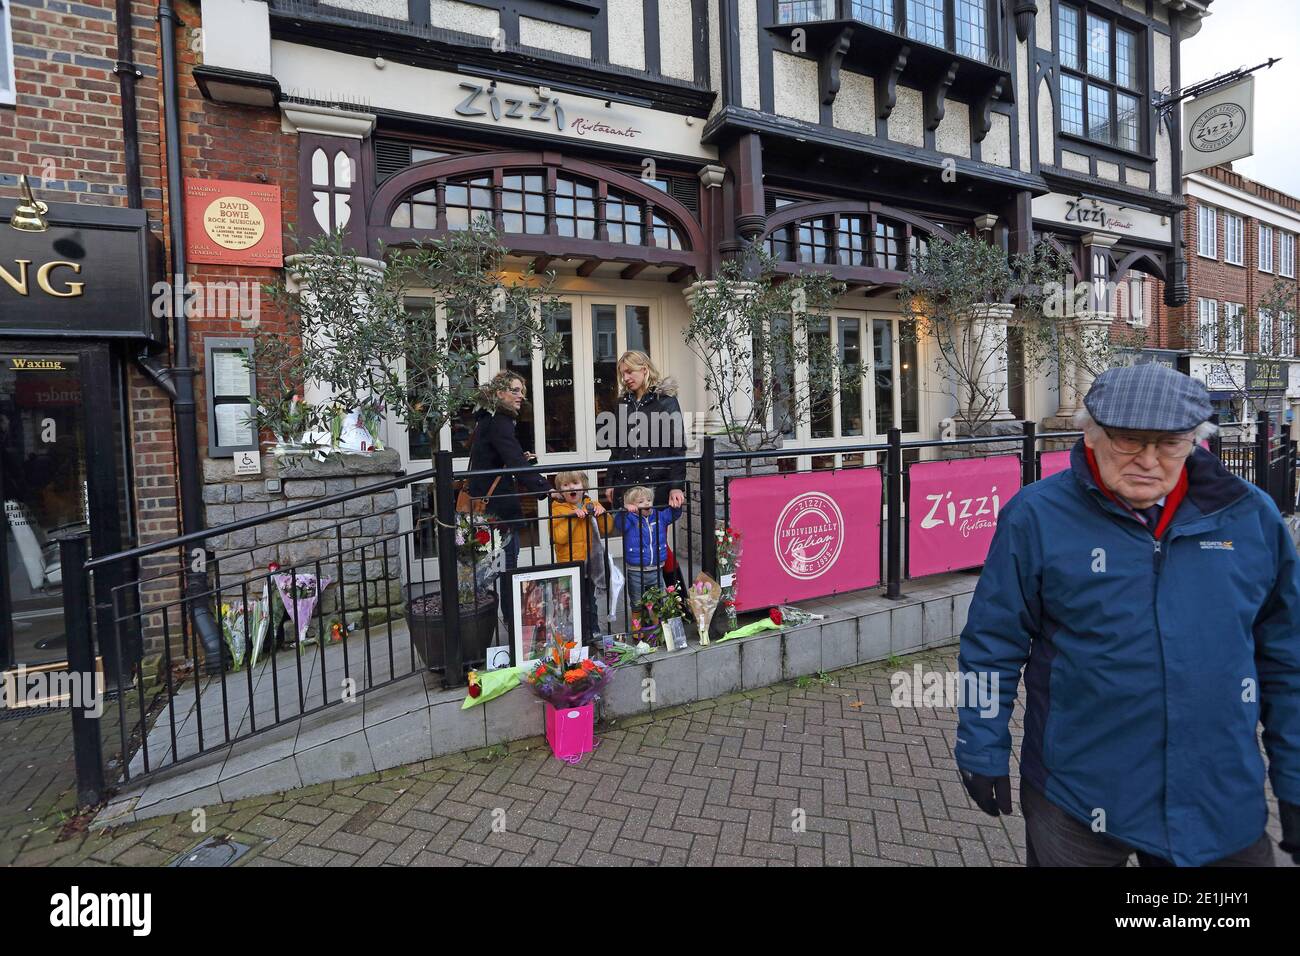 David Bowie, commemorations outside former Three Tuns Public House, Beckenham, London, UK, following his death in Jan 2016 Stock Photo